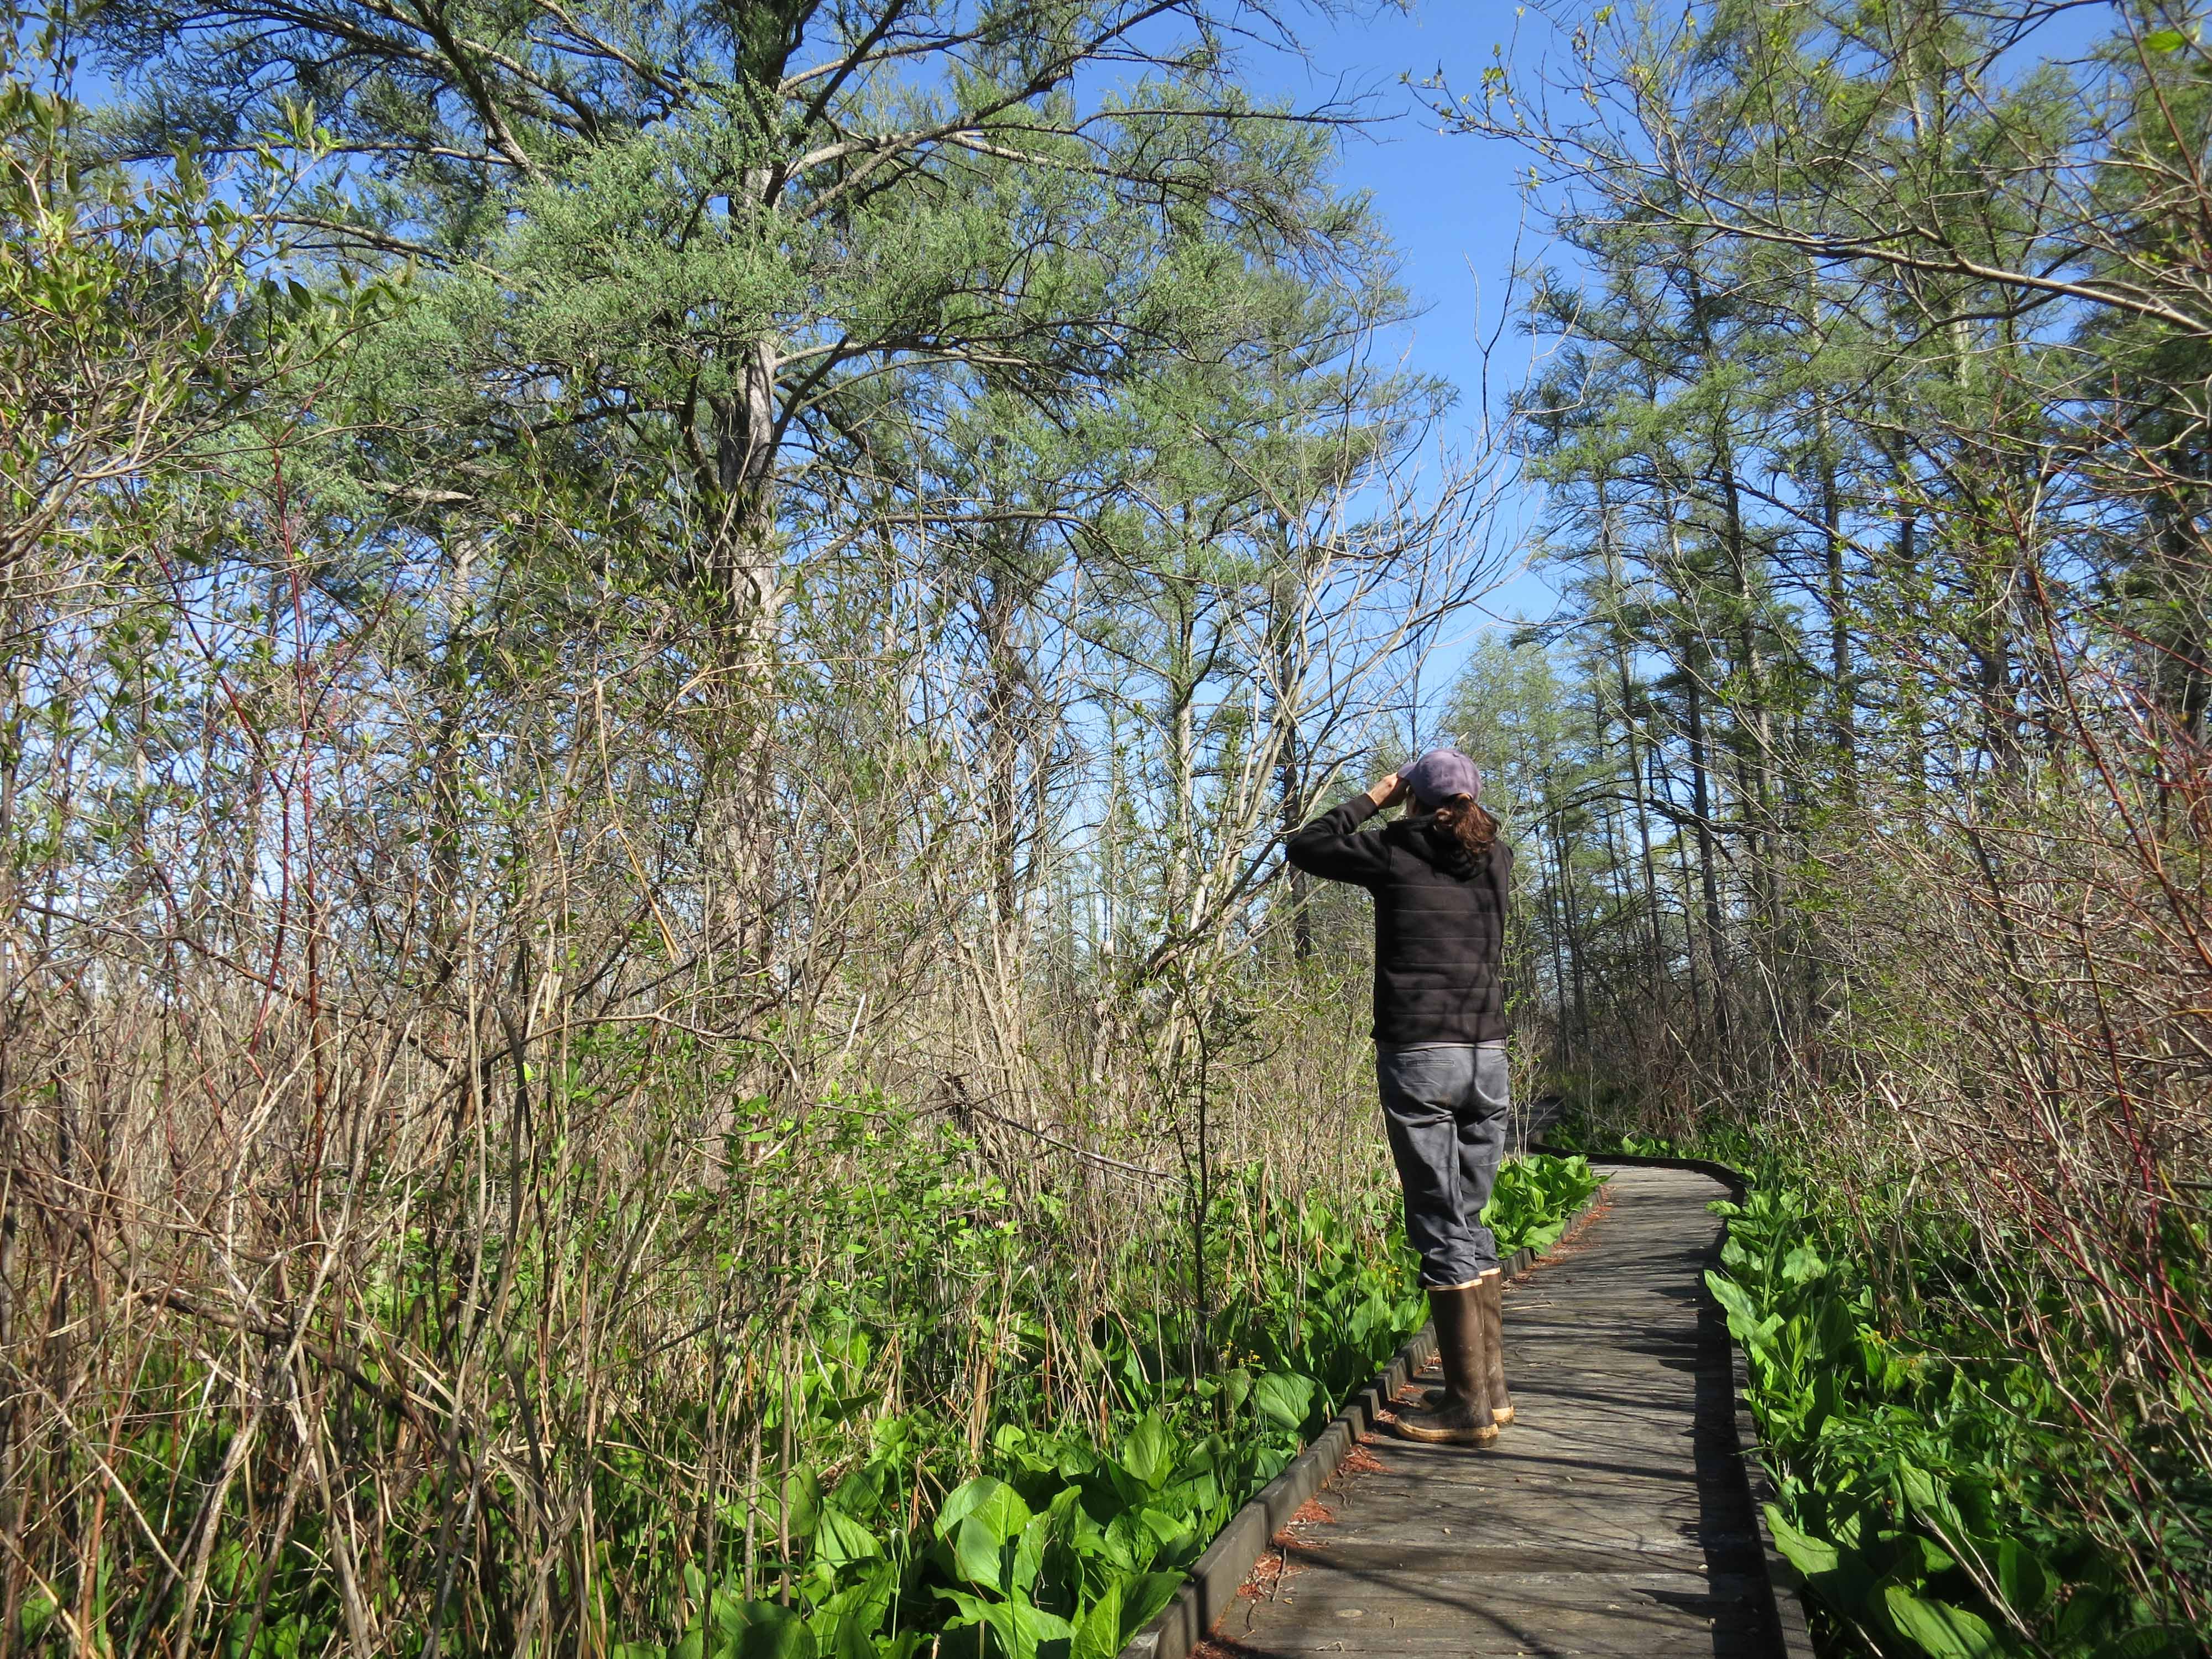 A hiker on a boardwalk trail surrounded by grasses and trees.